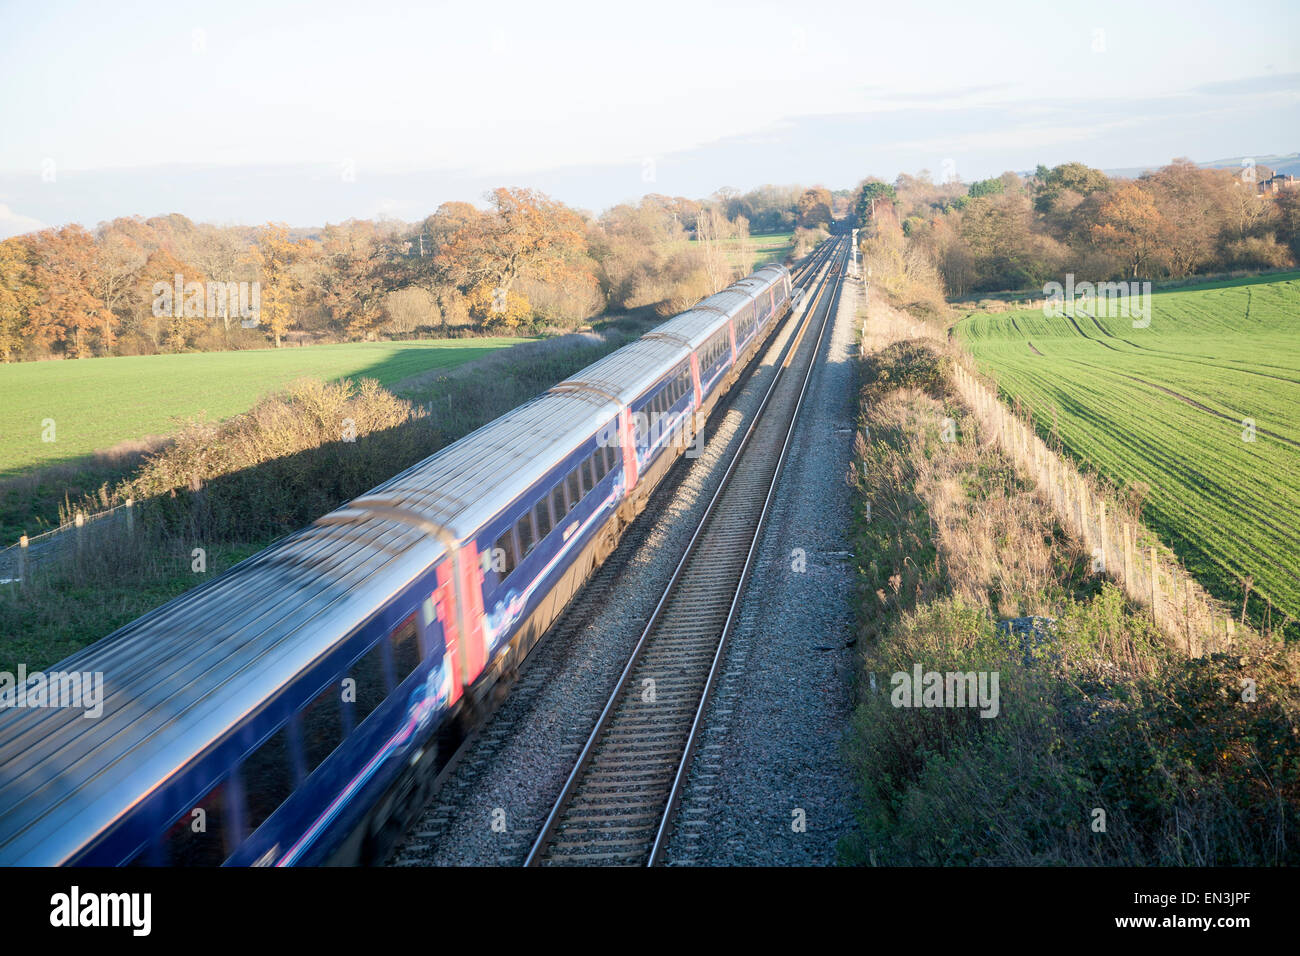 First Great Western inter-city diesel train on the West Coast mainline Woodborough, Wiltshire, England, UK Stock Photo